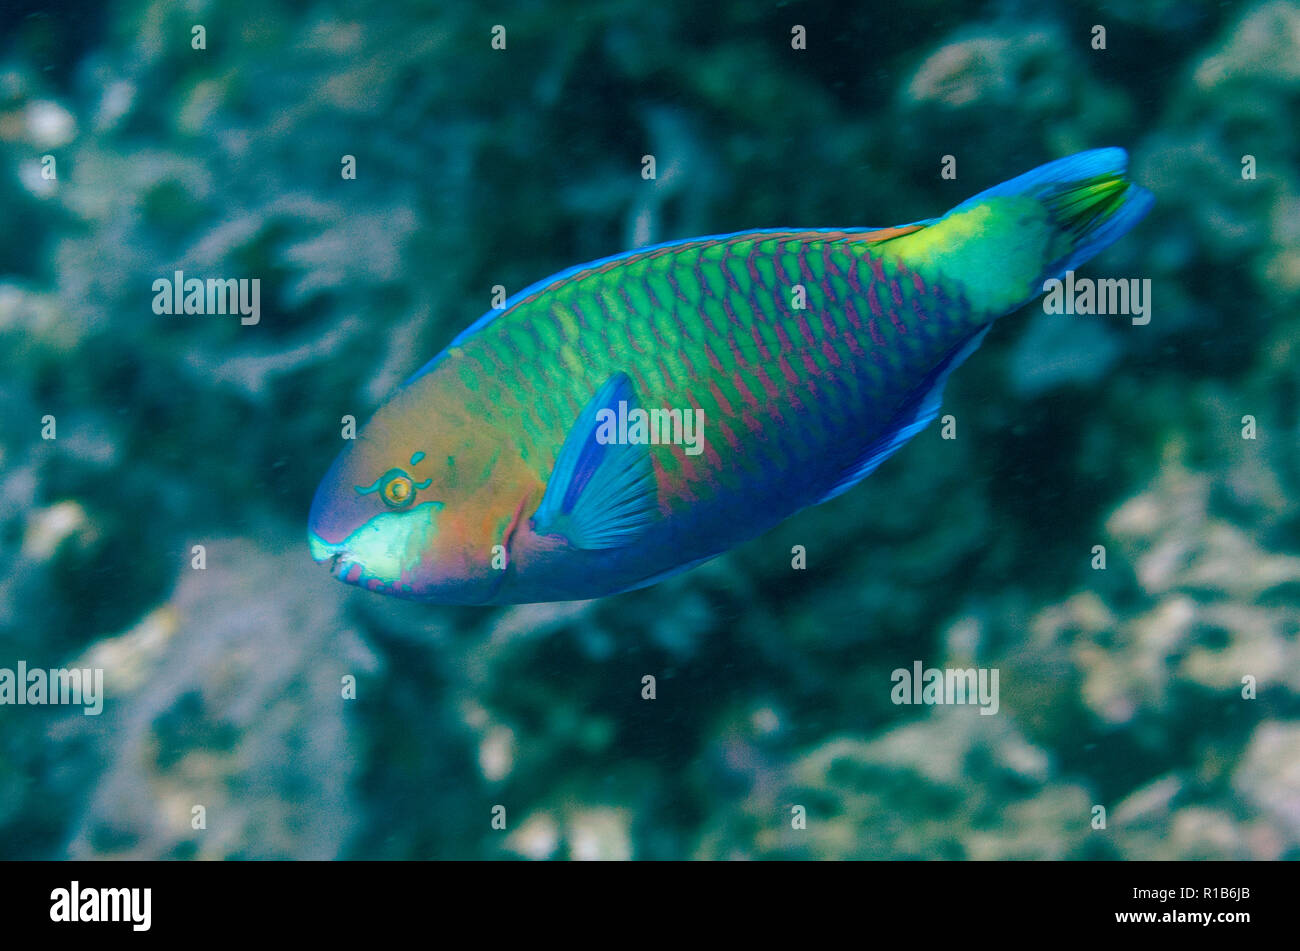 Quoy's Parrotfish, Scarus quoyi, California Dreaming dive site, Lembeh Straits, Sulawesi, Indonesia Foto Stock